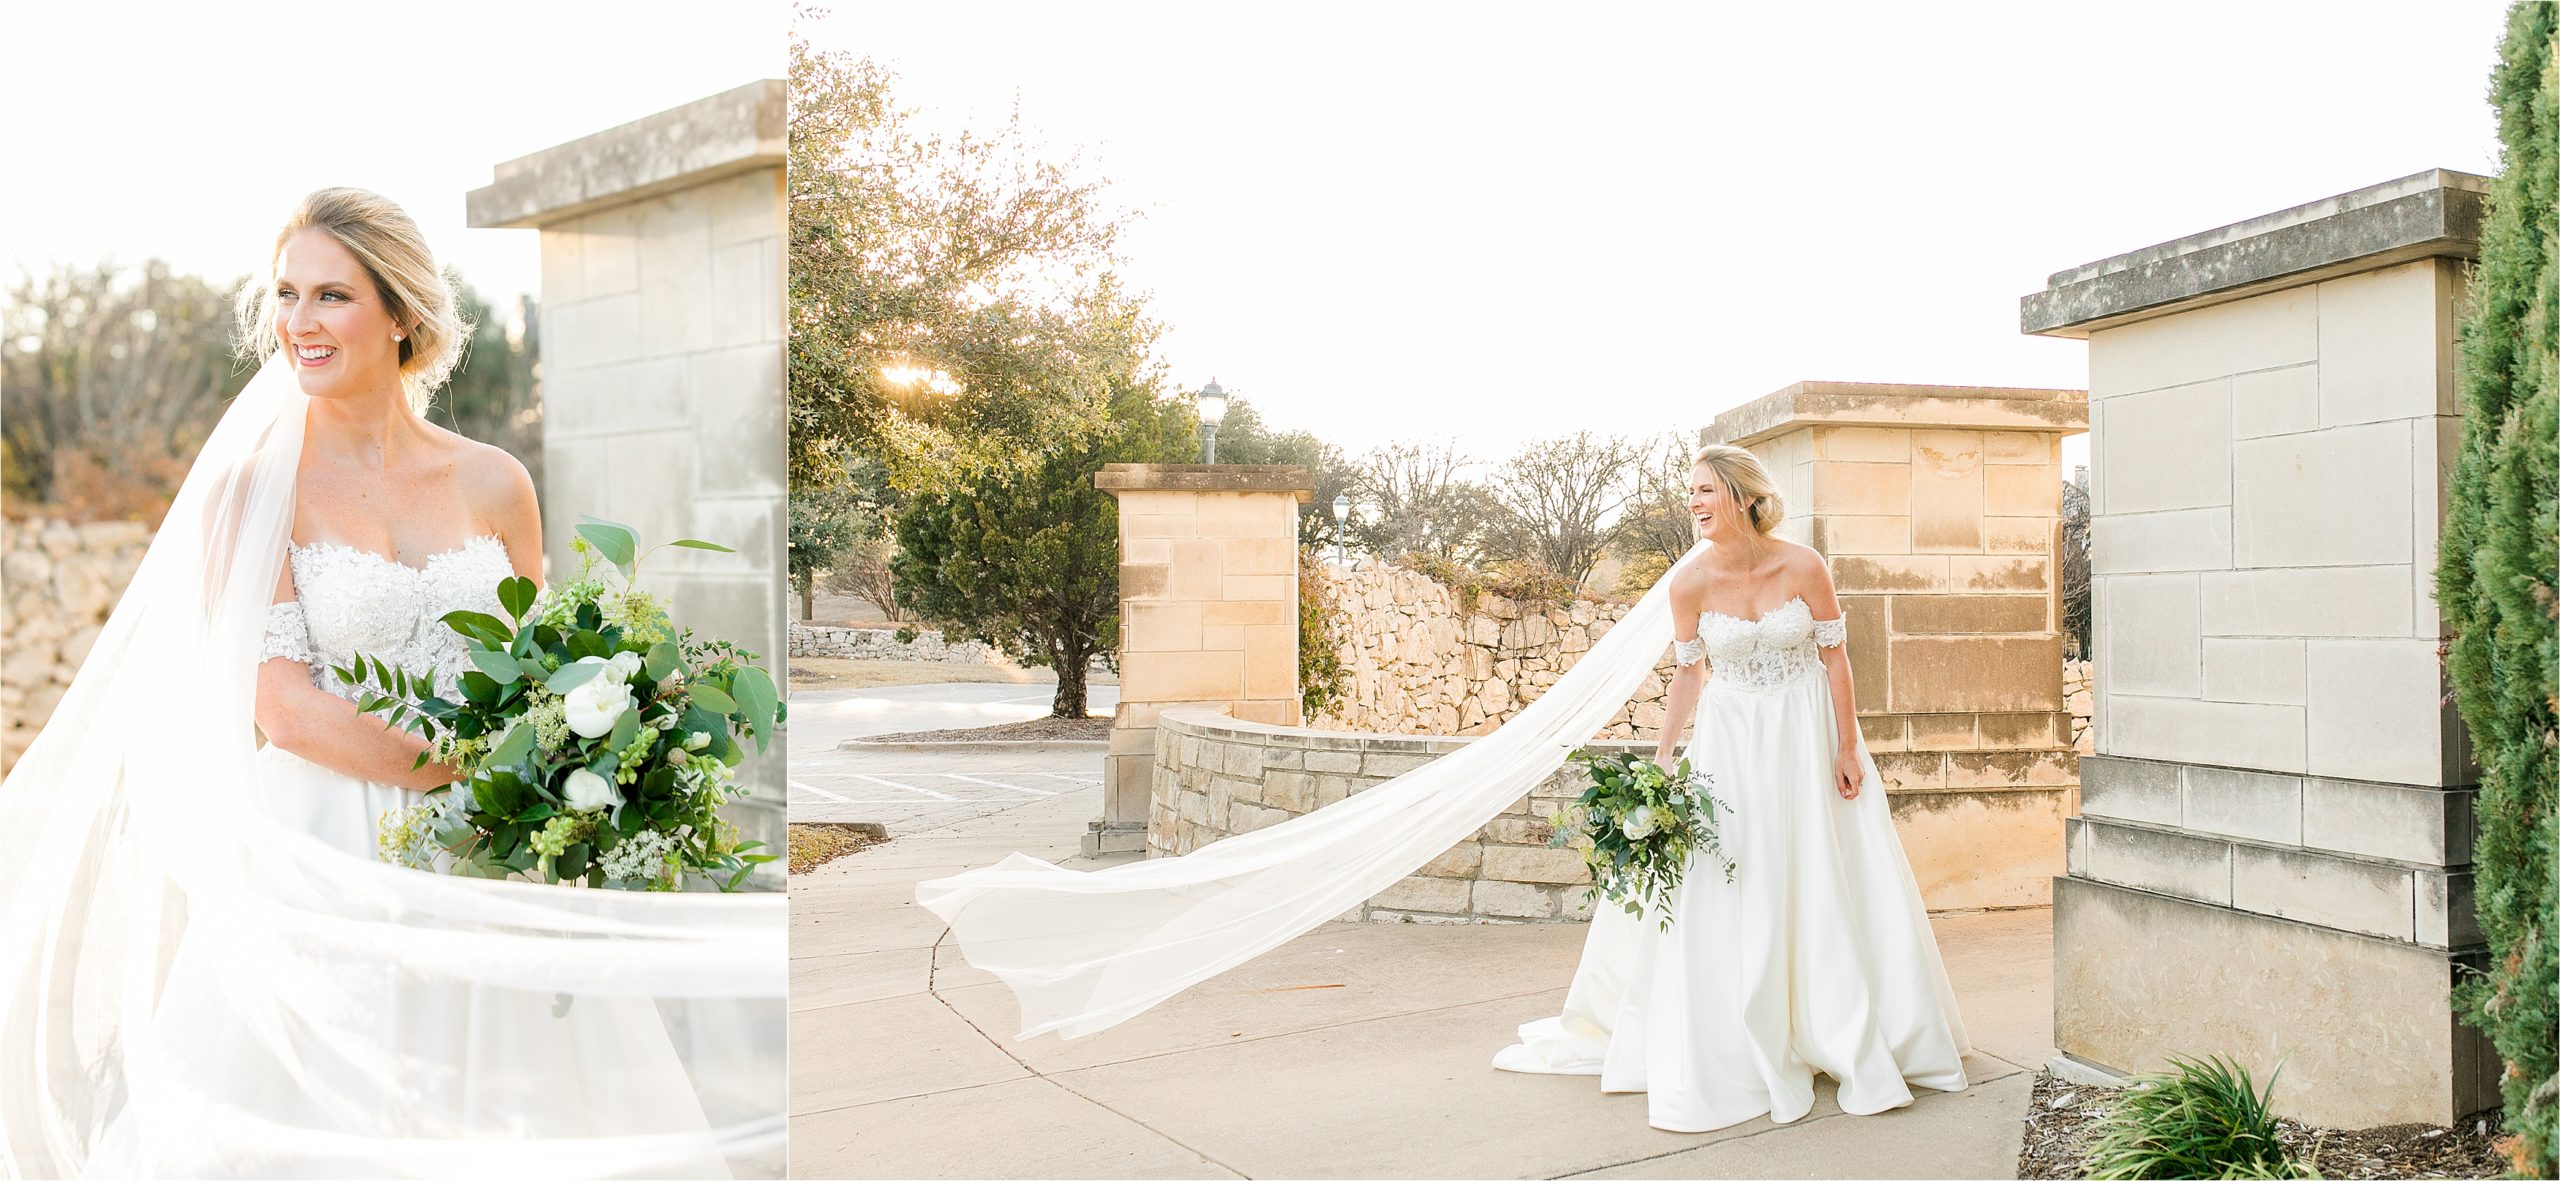 A bride's veil floats in front of her and out in the distance while she laughs in front of a stone wall at adriatica village with san antonio wedding photographer 